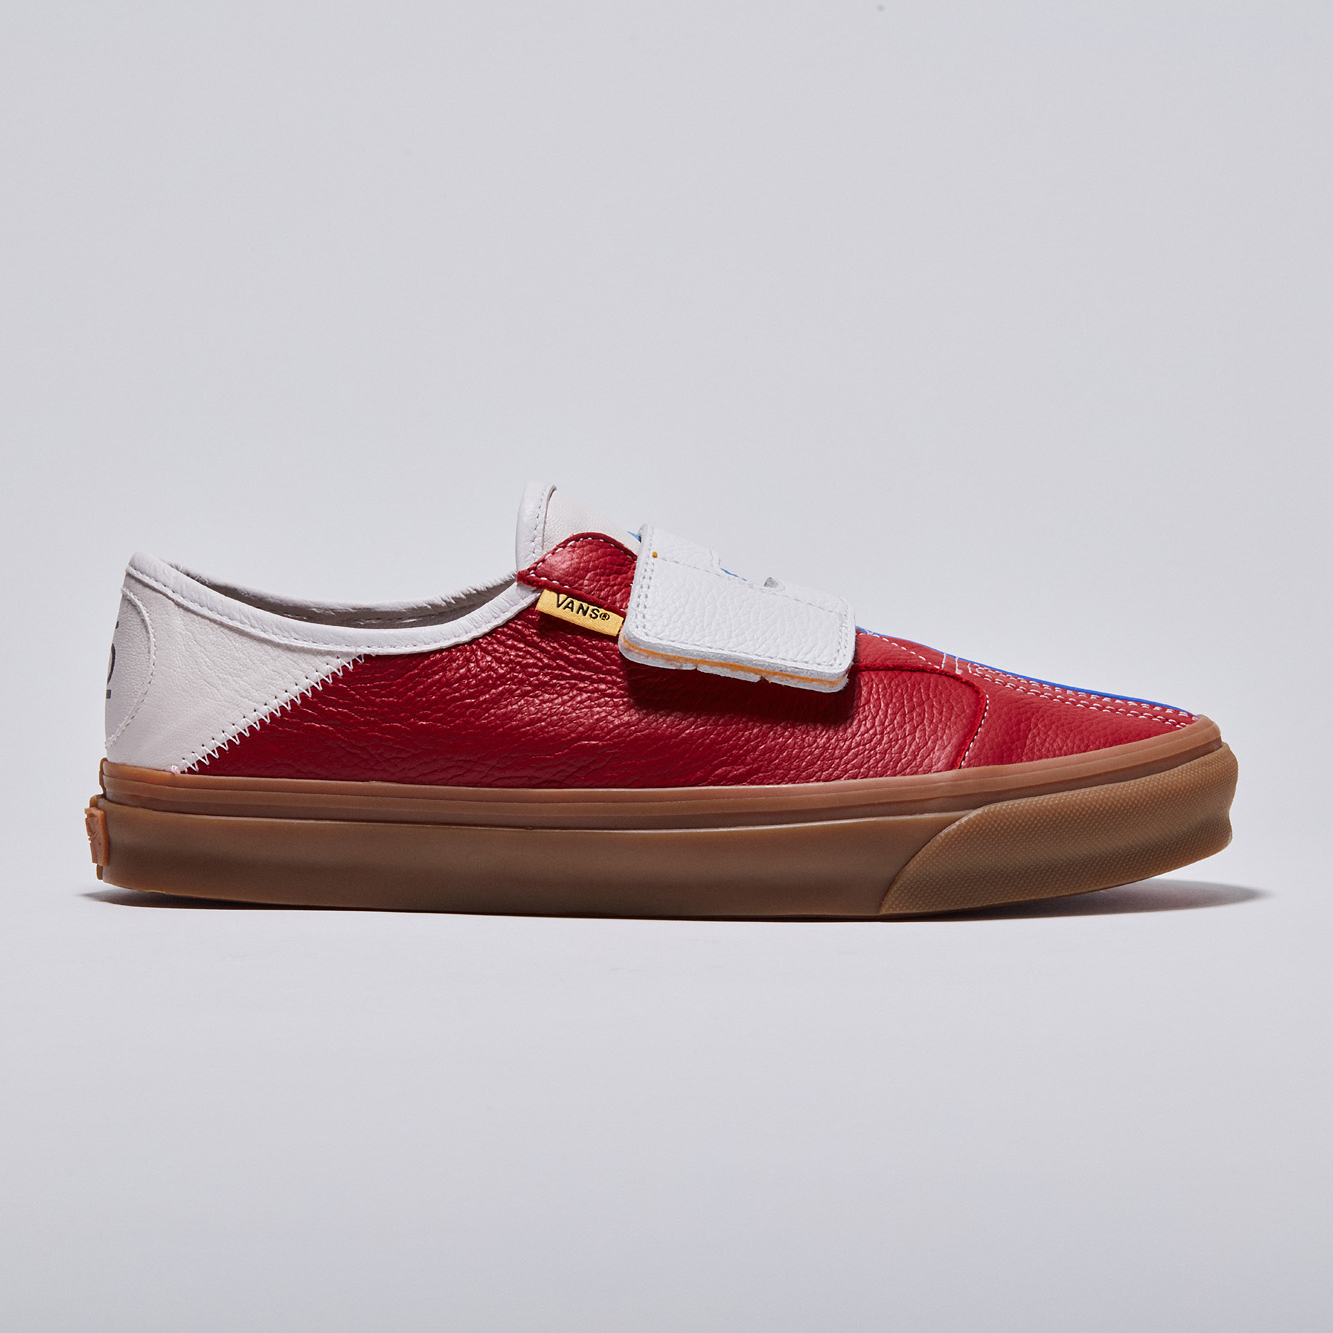 Deaton Chris Anthony x Vault by Vans Collection | Nice Kicks